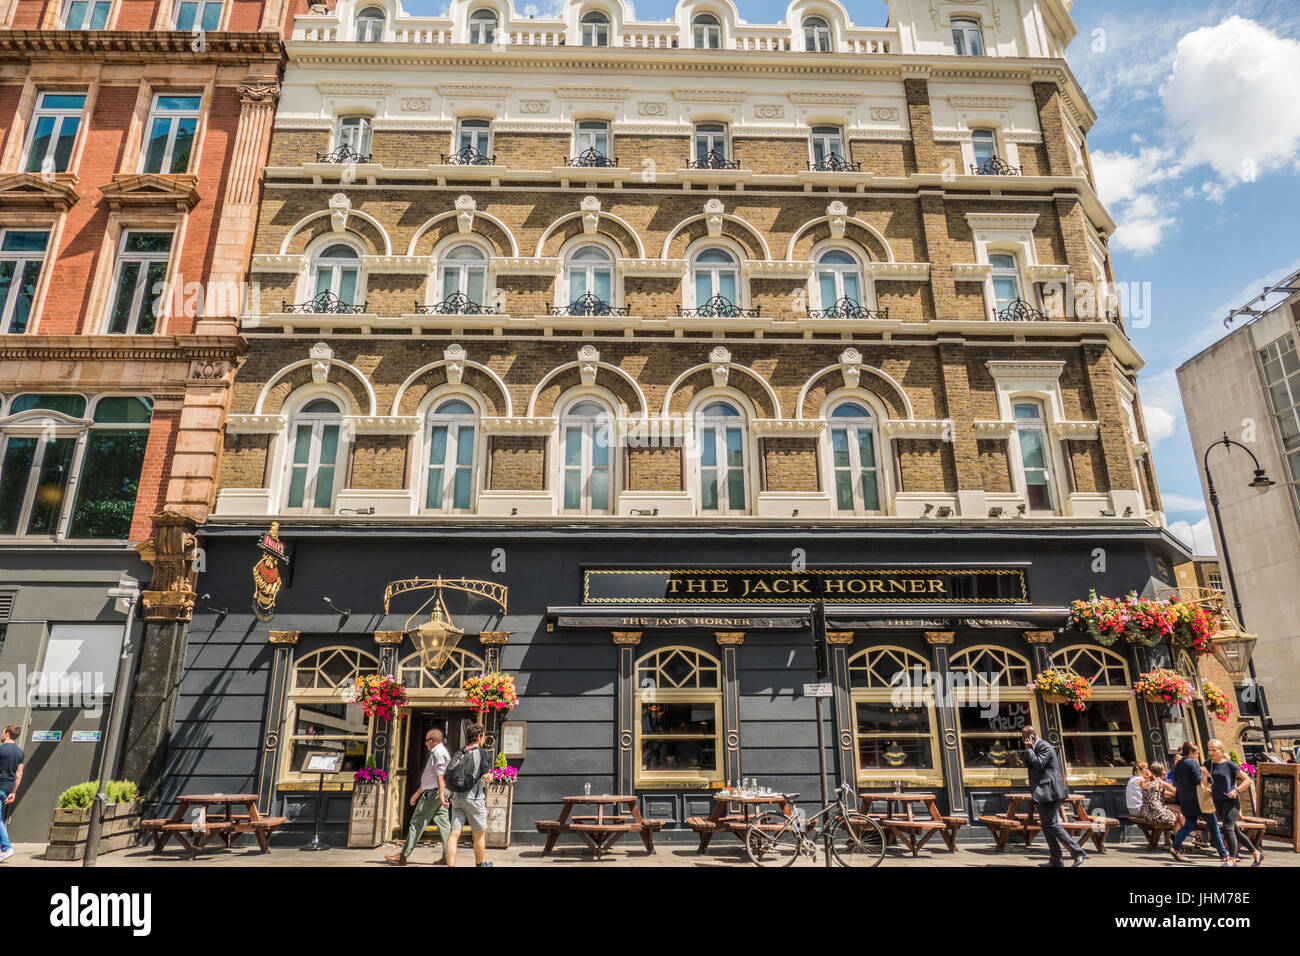 The Jack Horner pub, with accommodation above, Tottenham Court Road ...